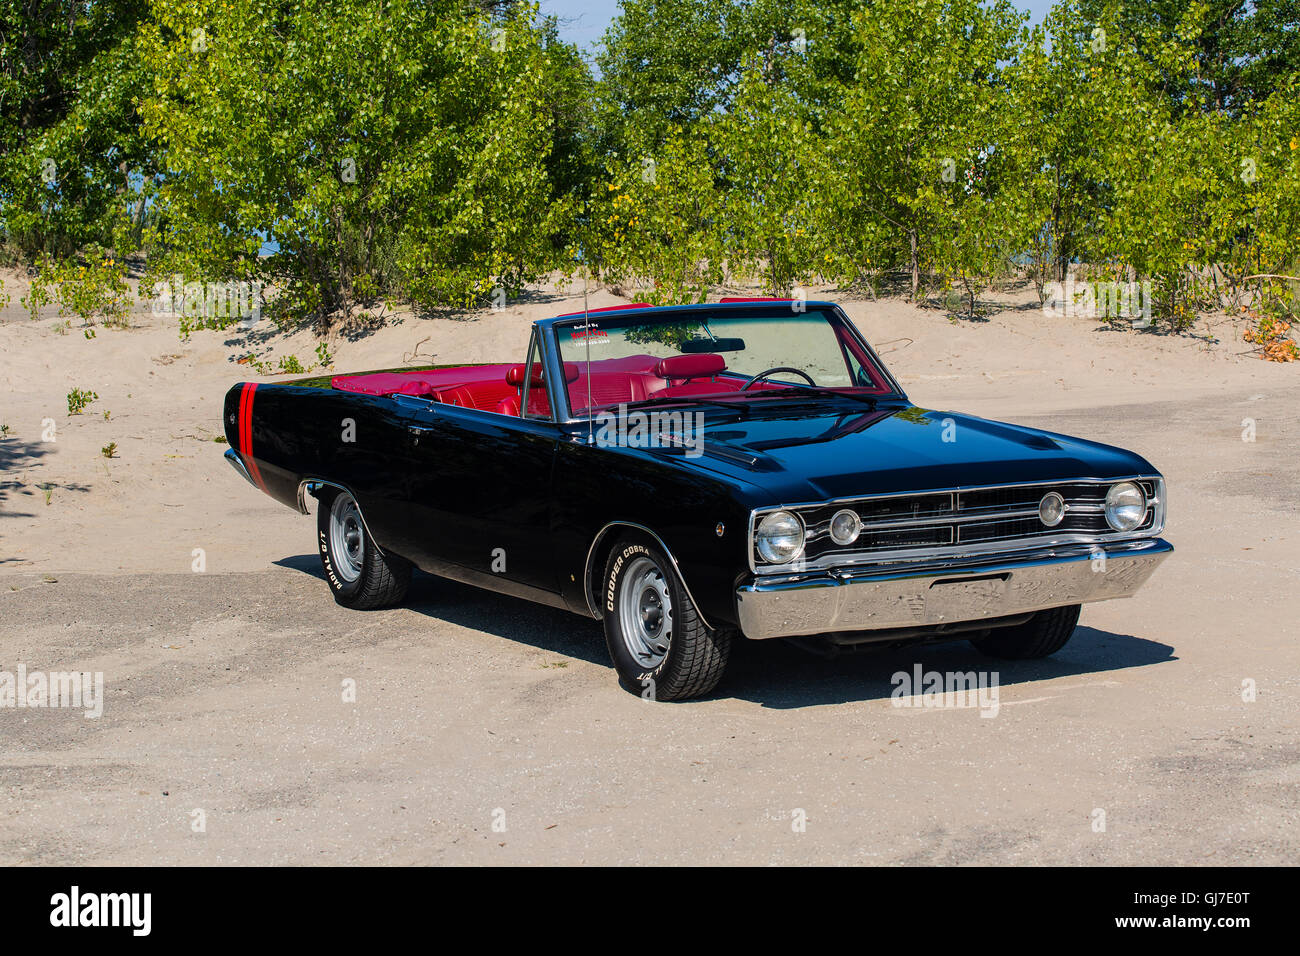 100+ Dodge Dart Stock Photos, Pictures & Royalty-Free Images - iStock